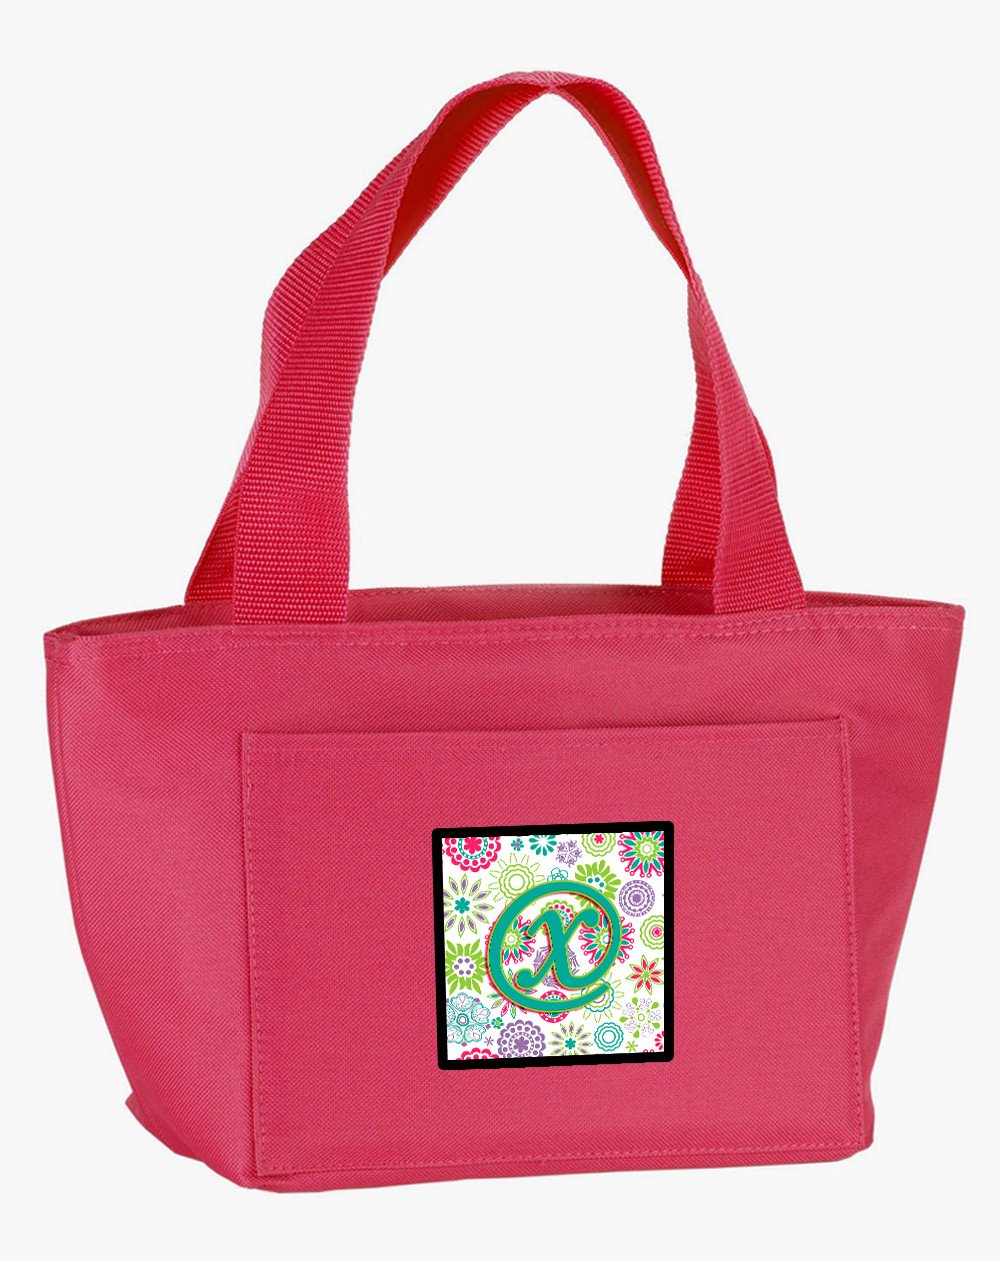 Letter X Flowers Pink Teal Green Initial Lunch Bag CJ2011-XPK-8808 by Caroline's Treasures